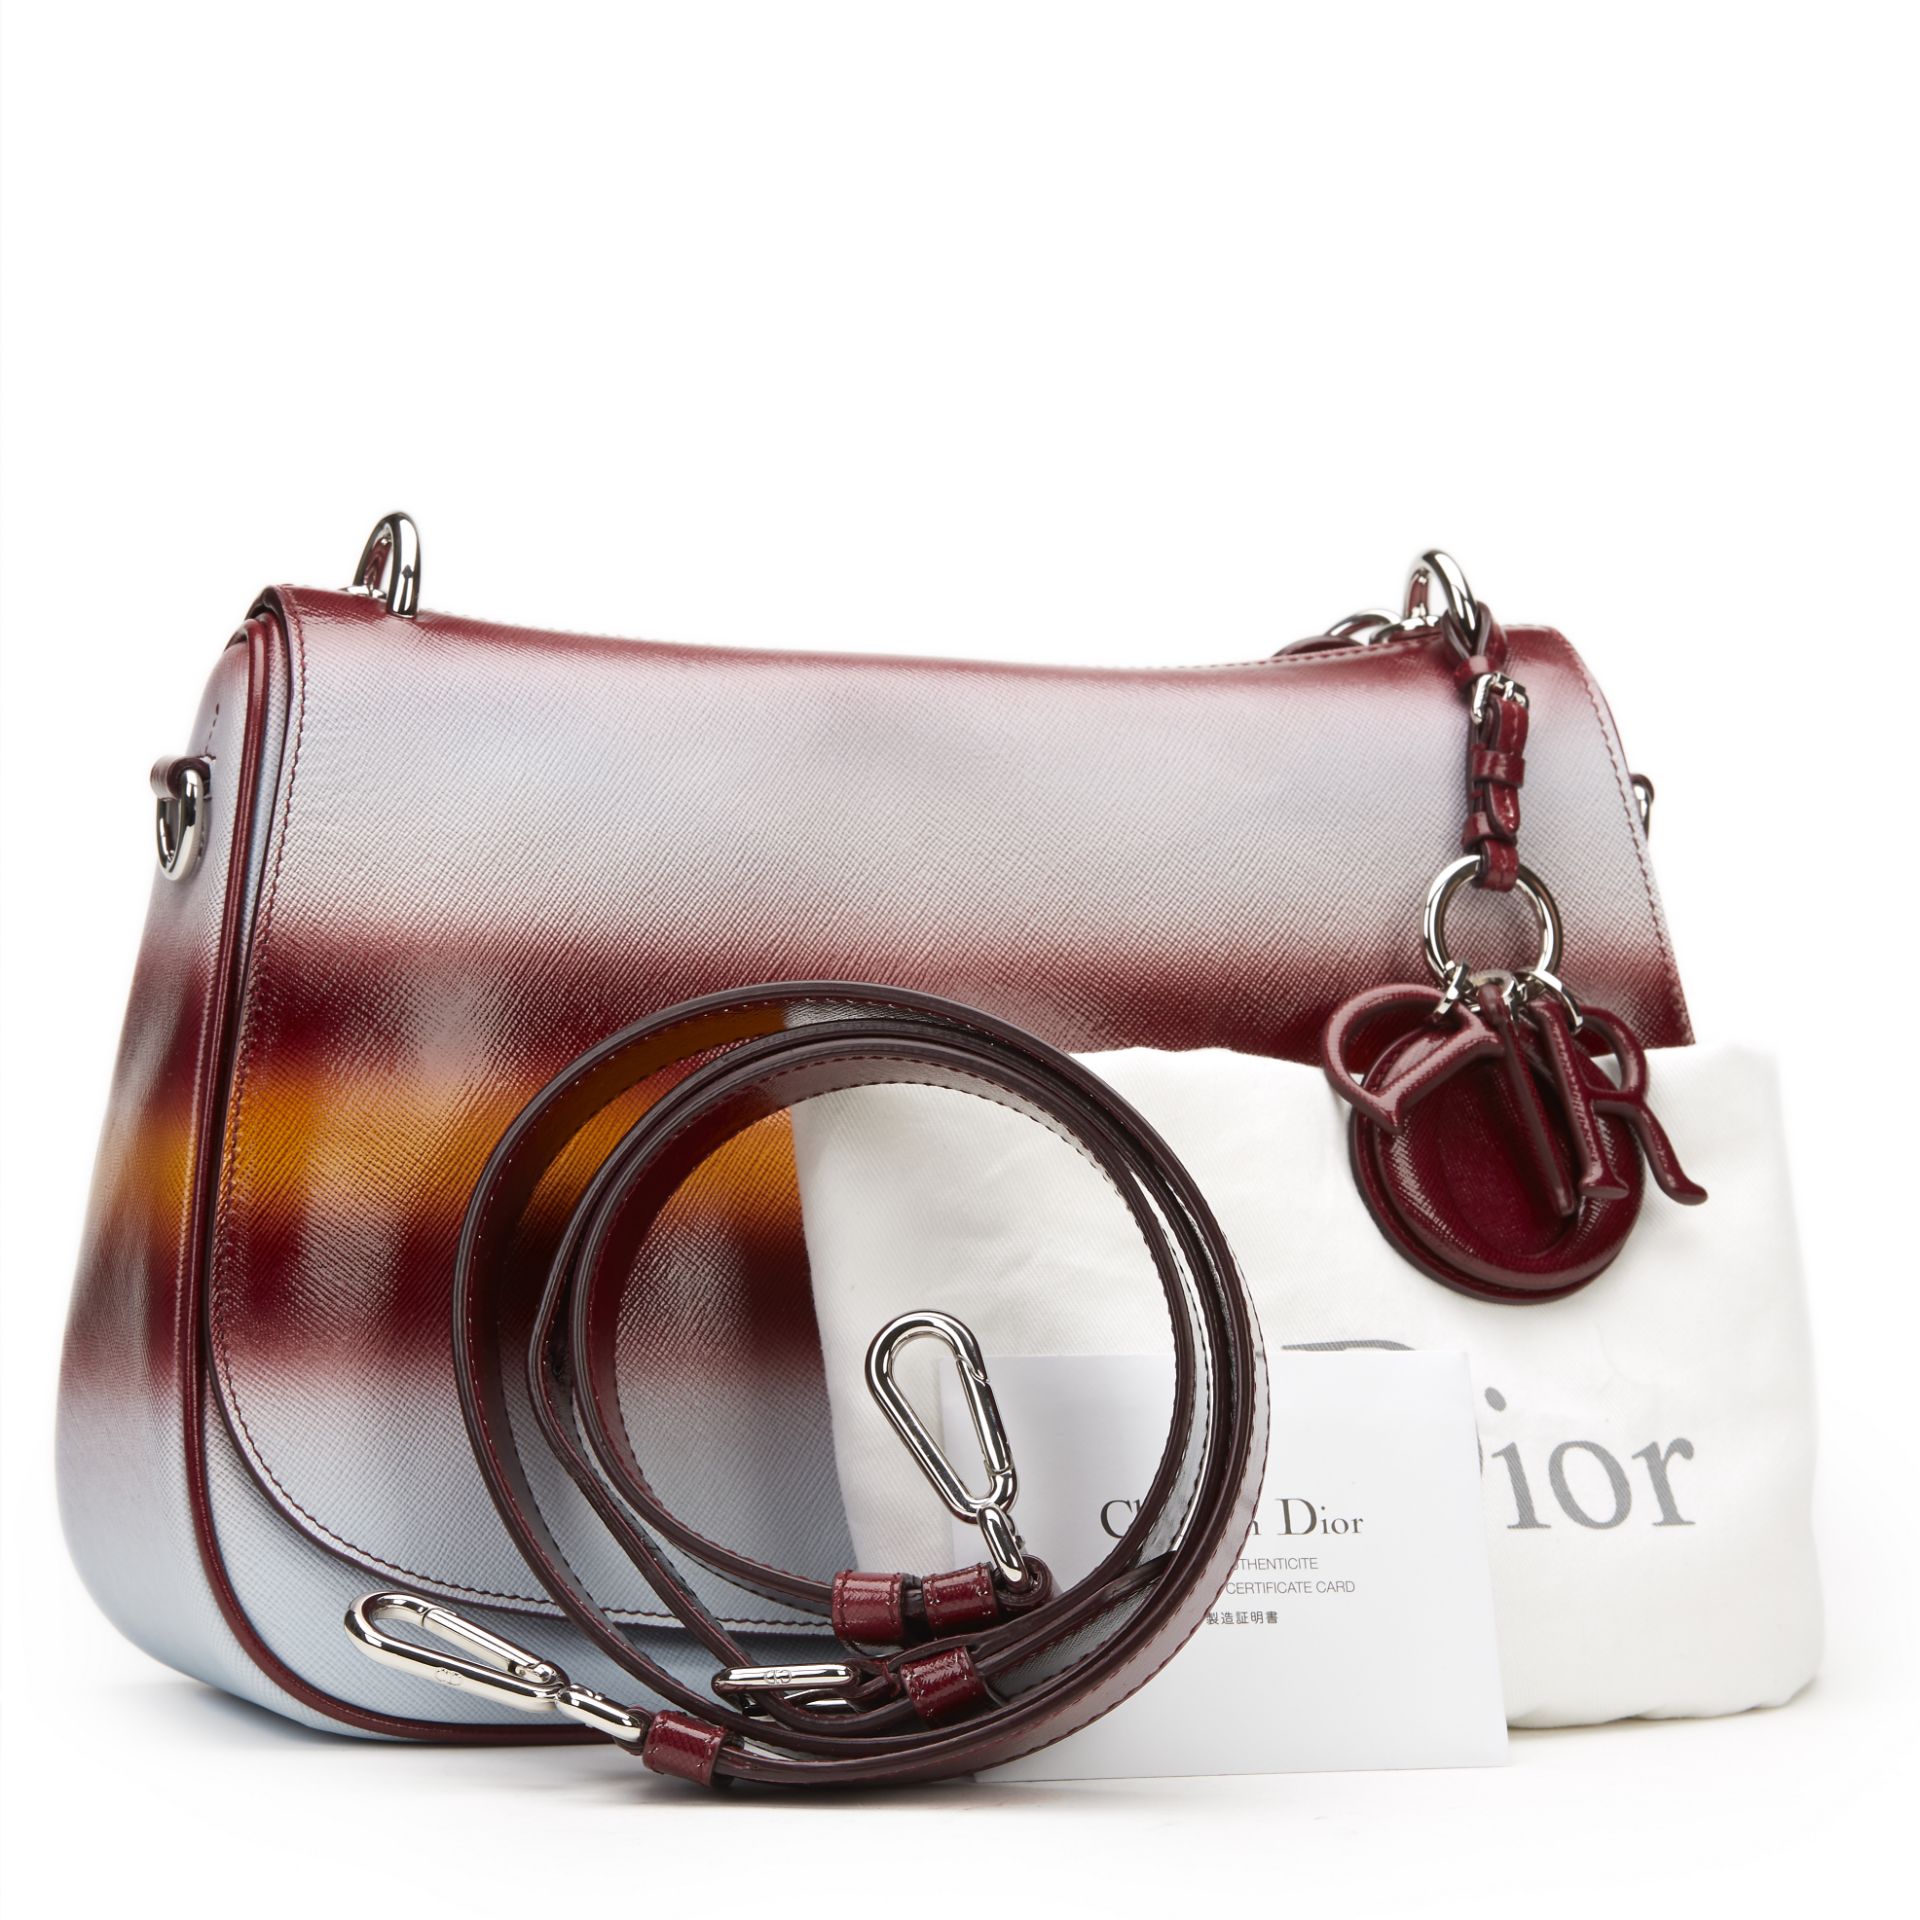 Christian Dior Maroon, Mustard & Blue Gradient Patent Leather Dune Bag - Image 10 of 11